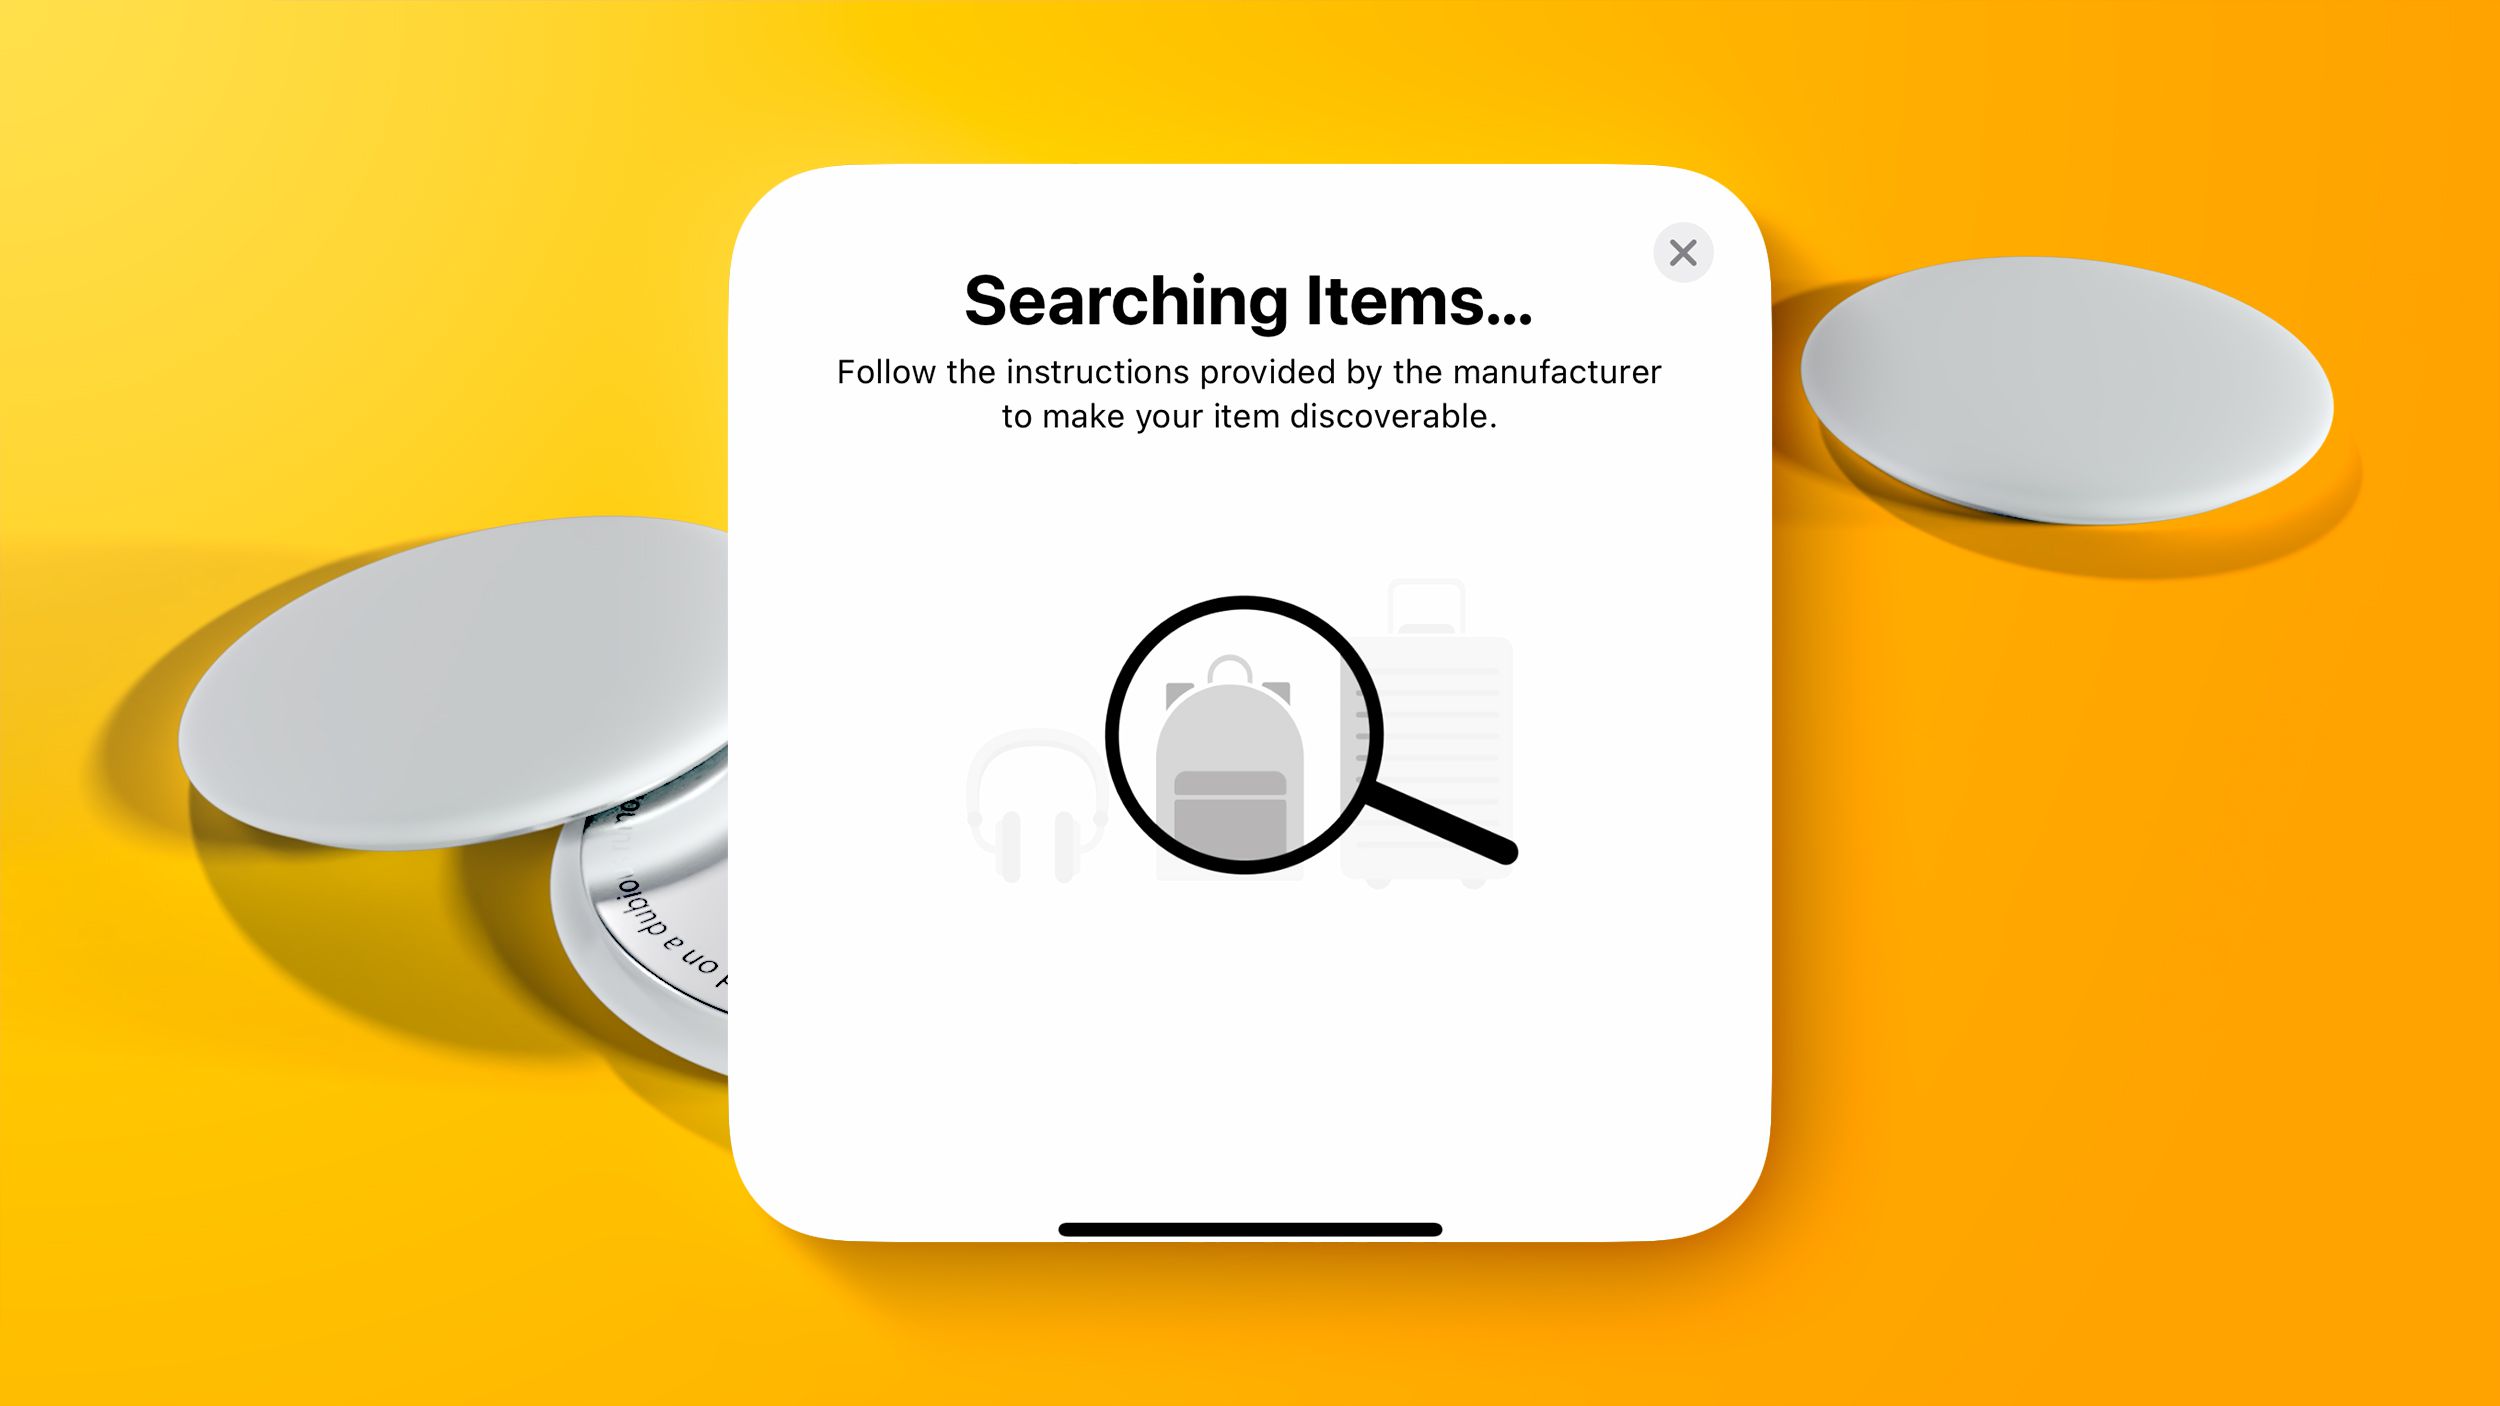 Safari allows users to enable the ‘Hidden’ items’ tab in Find Me app before launching AirTags